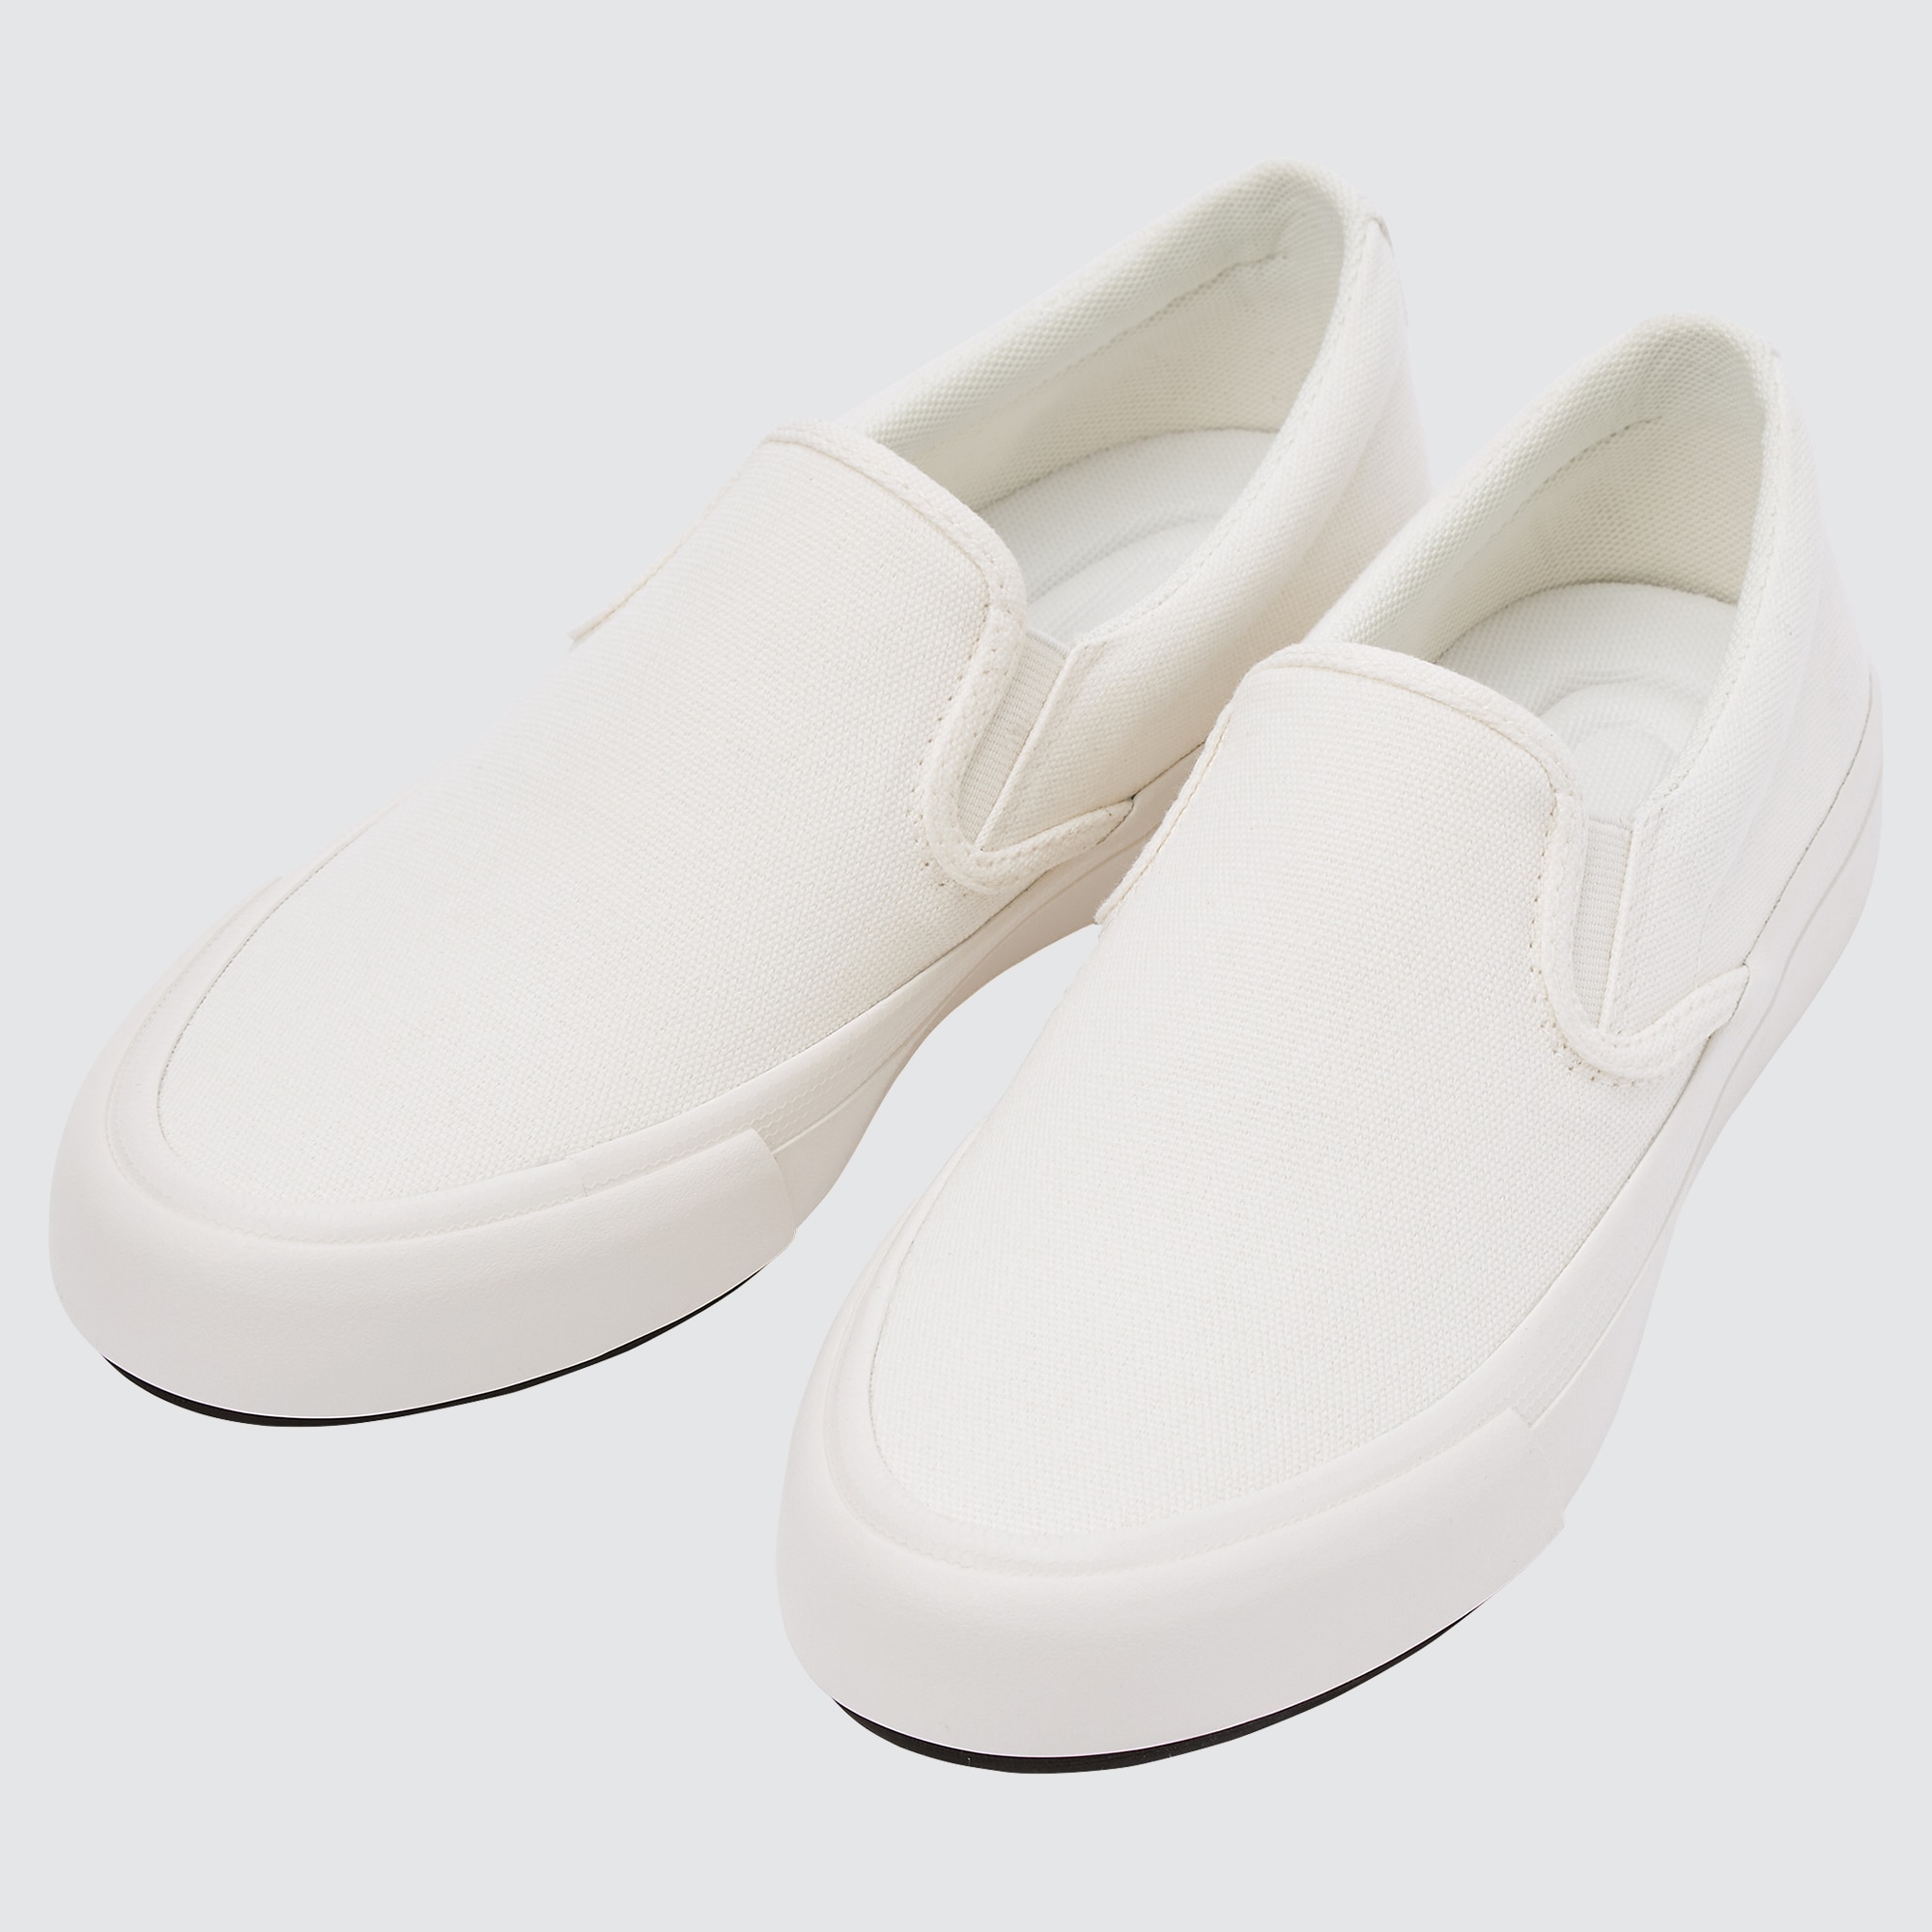 Plimsolls | Shop ASOS for Shoes, Heels and Trainers | ASOS